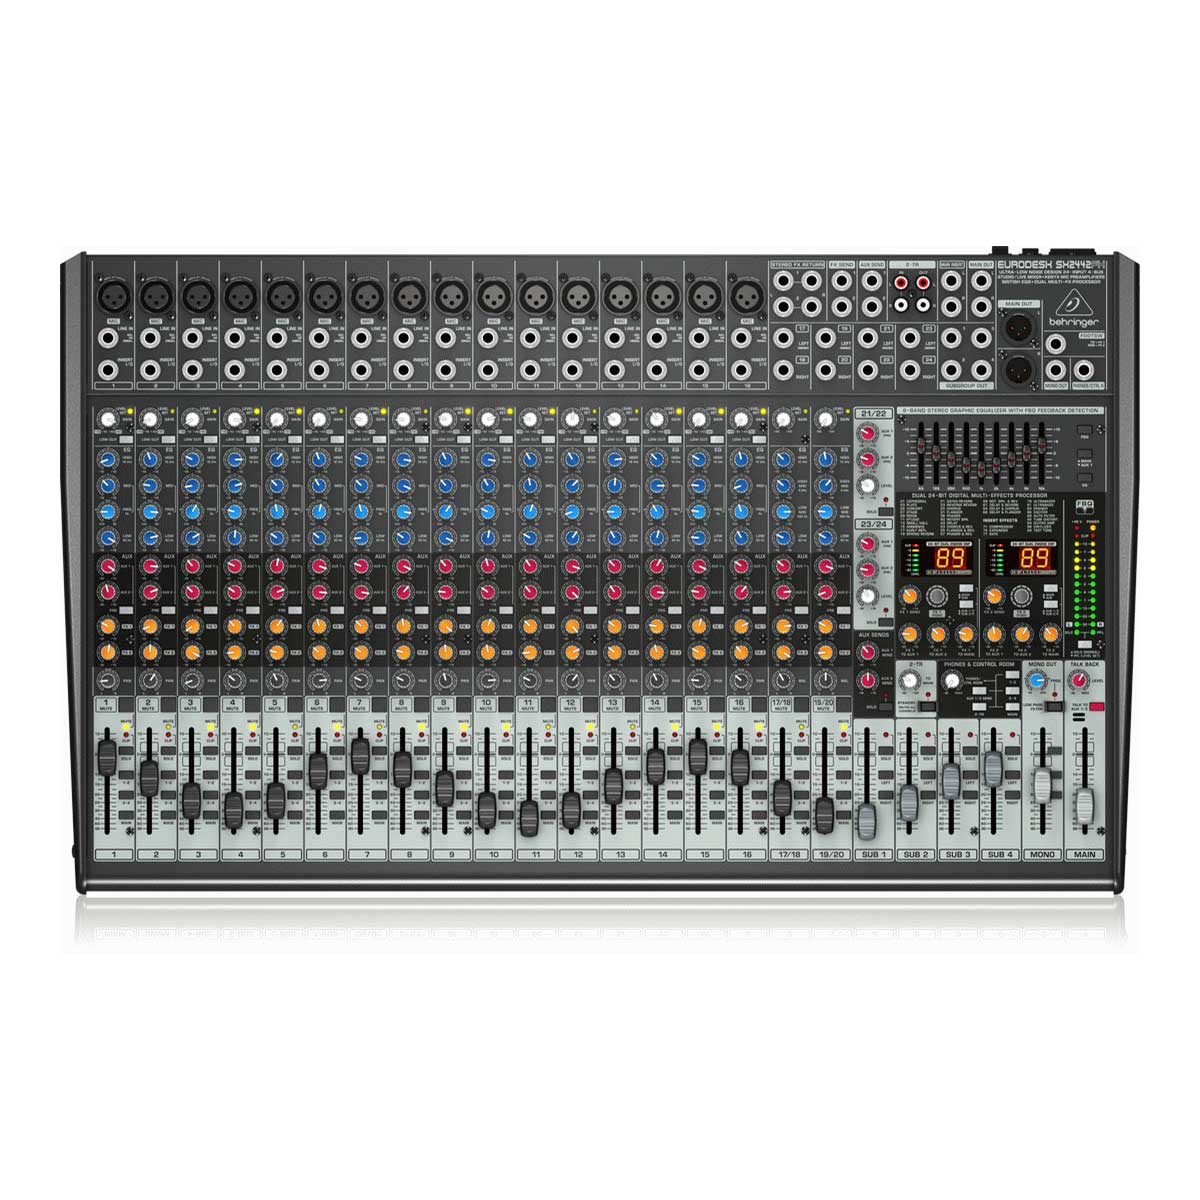 Behringer Eurodesk SX2442FX 24-Input 4-Bus Studio/Live Mixer with XENYX Mic Preamplifiers, British EQs and Dual Multi-FX Processor